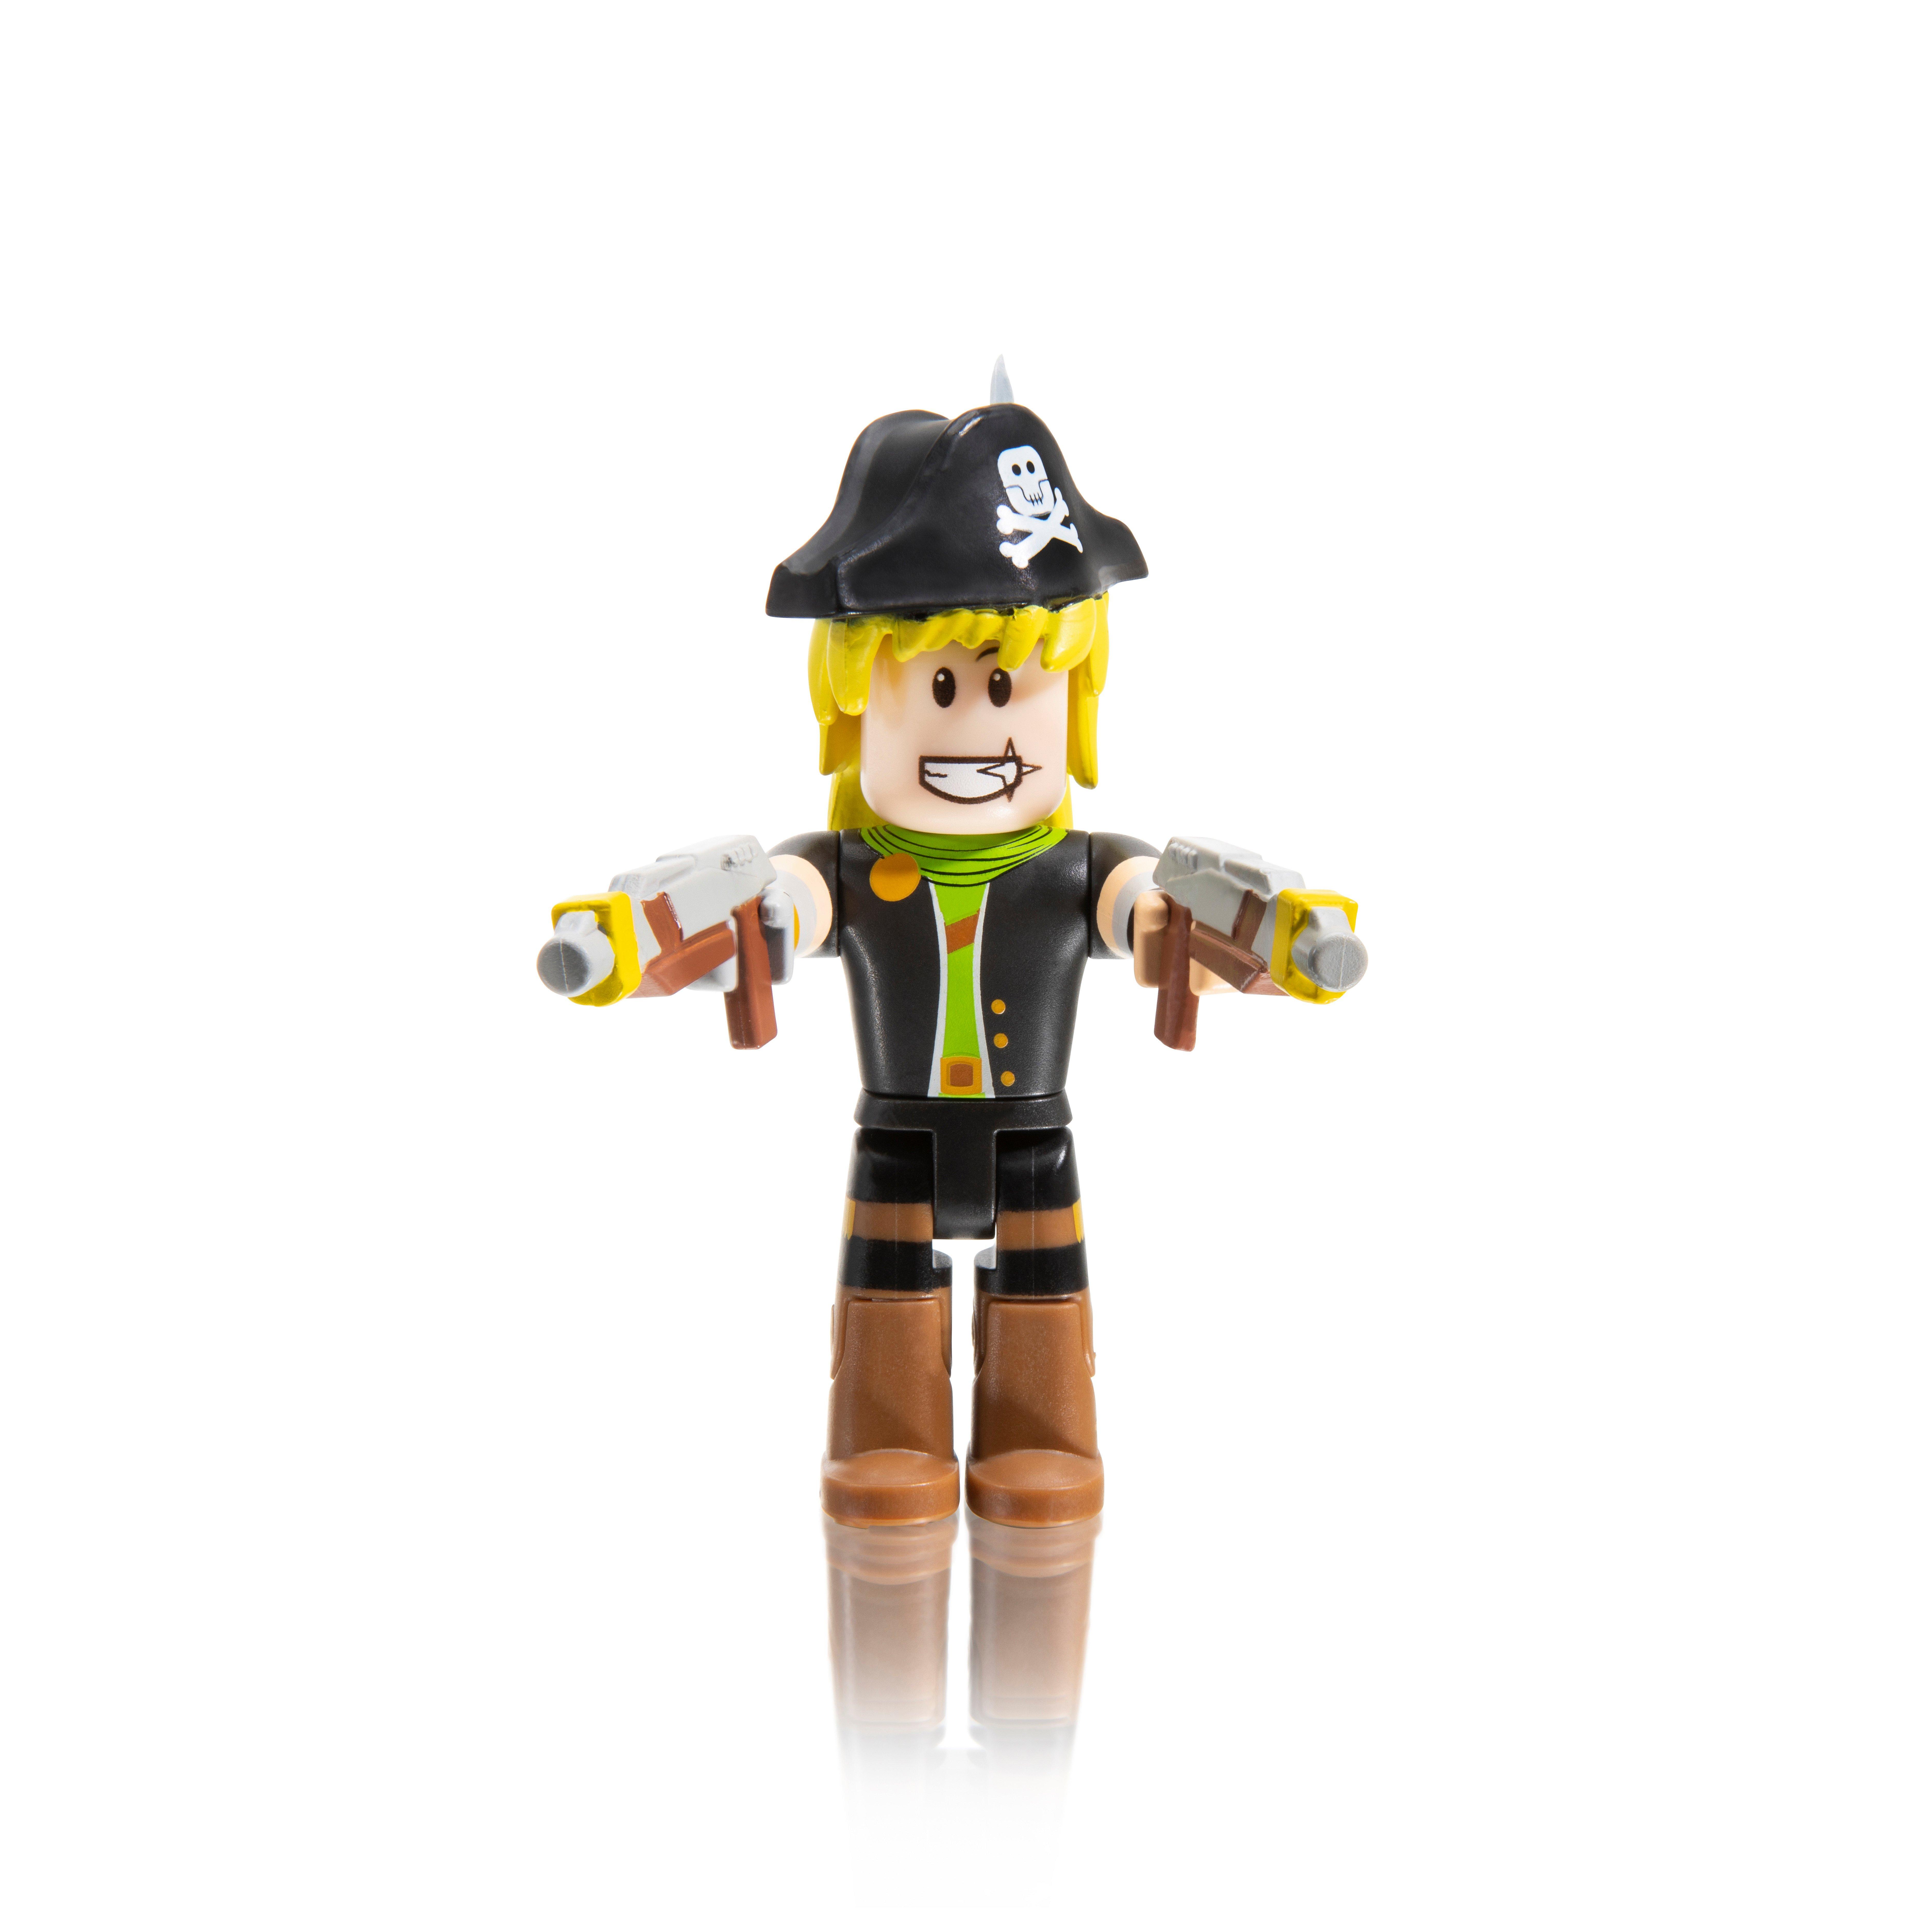 Roblox Action Collection Series 7 Mystery Figure Includes 1 Figure And Exclusive Virtual Item Gamestop - roblox mystery figures series 7